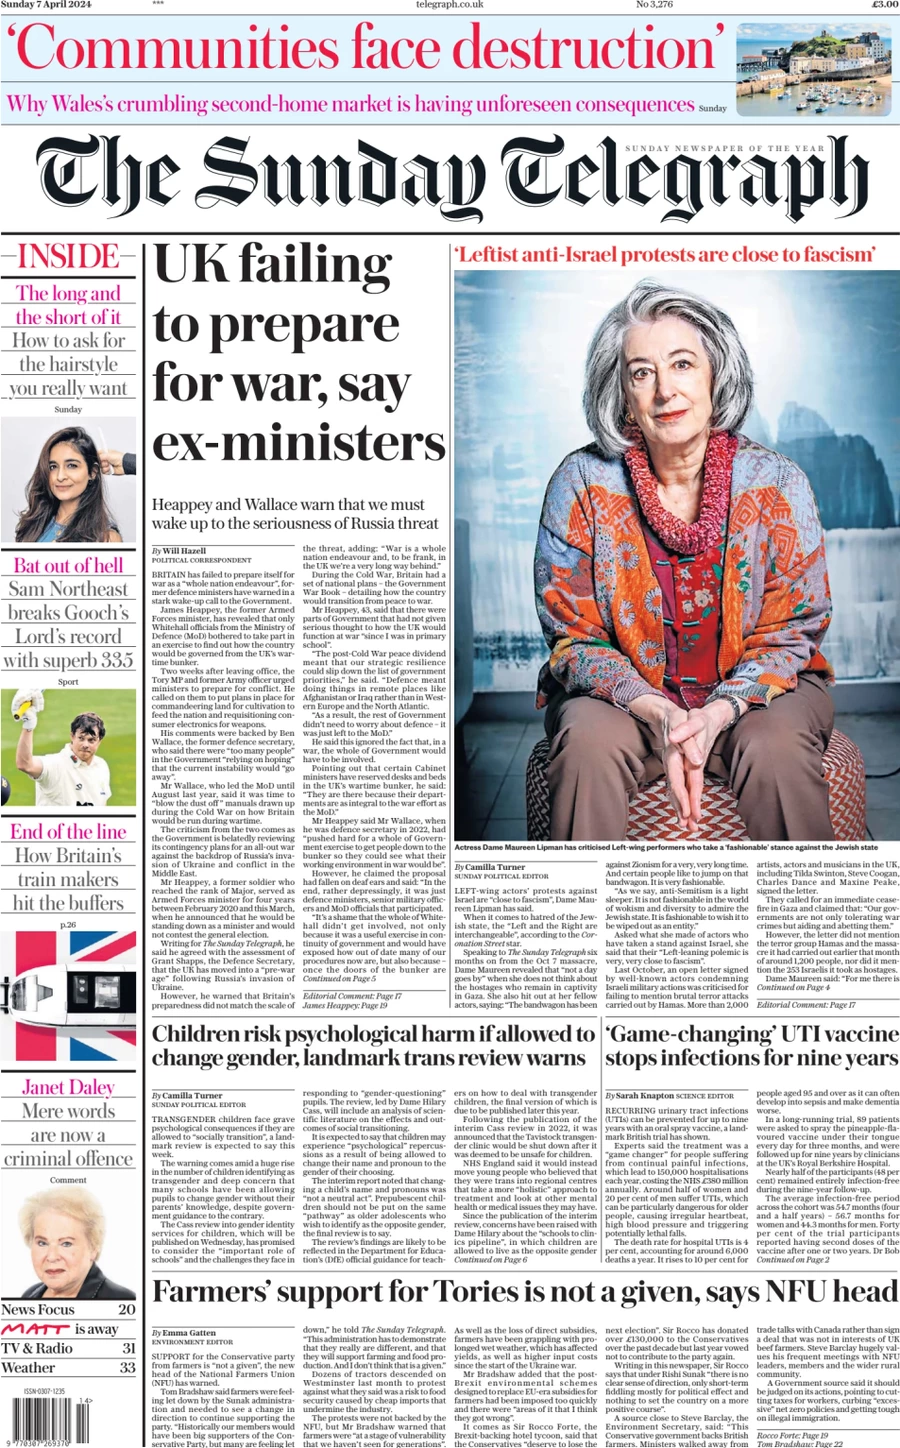 The Sunday Telegraph - UK failing to prepare for war, says ex-ministers